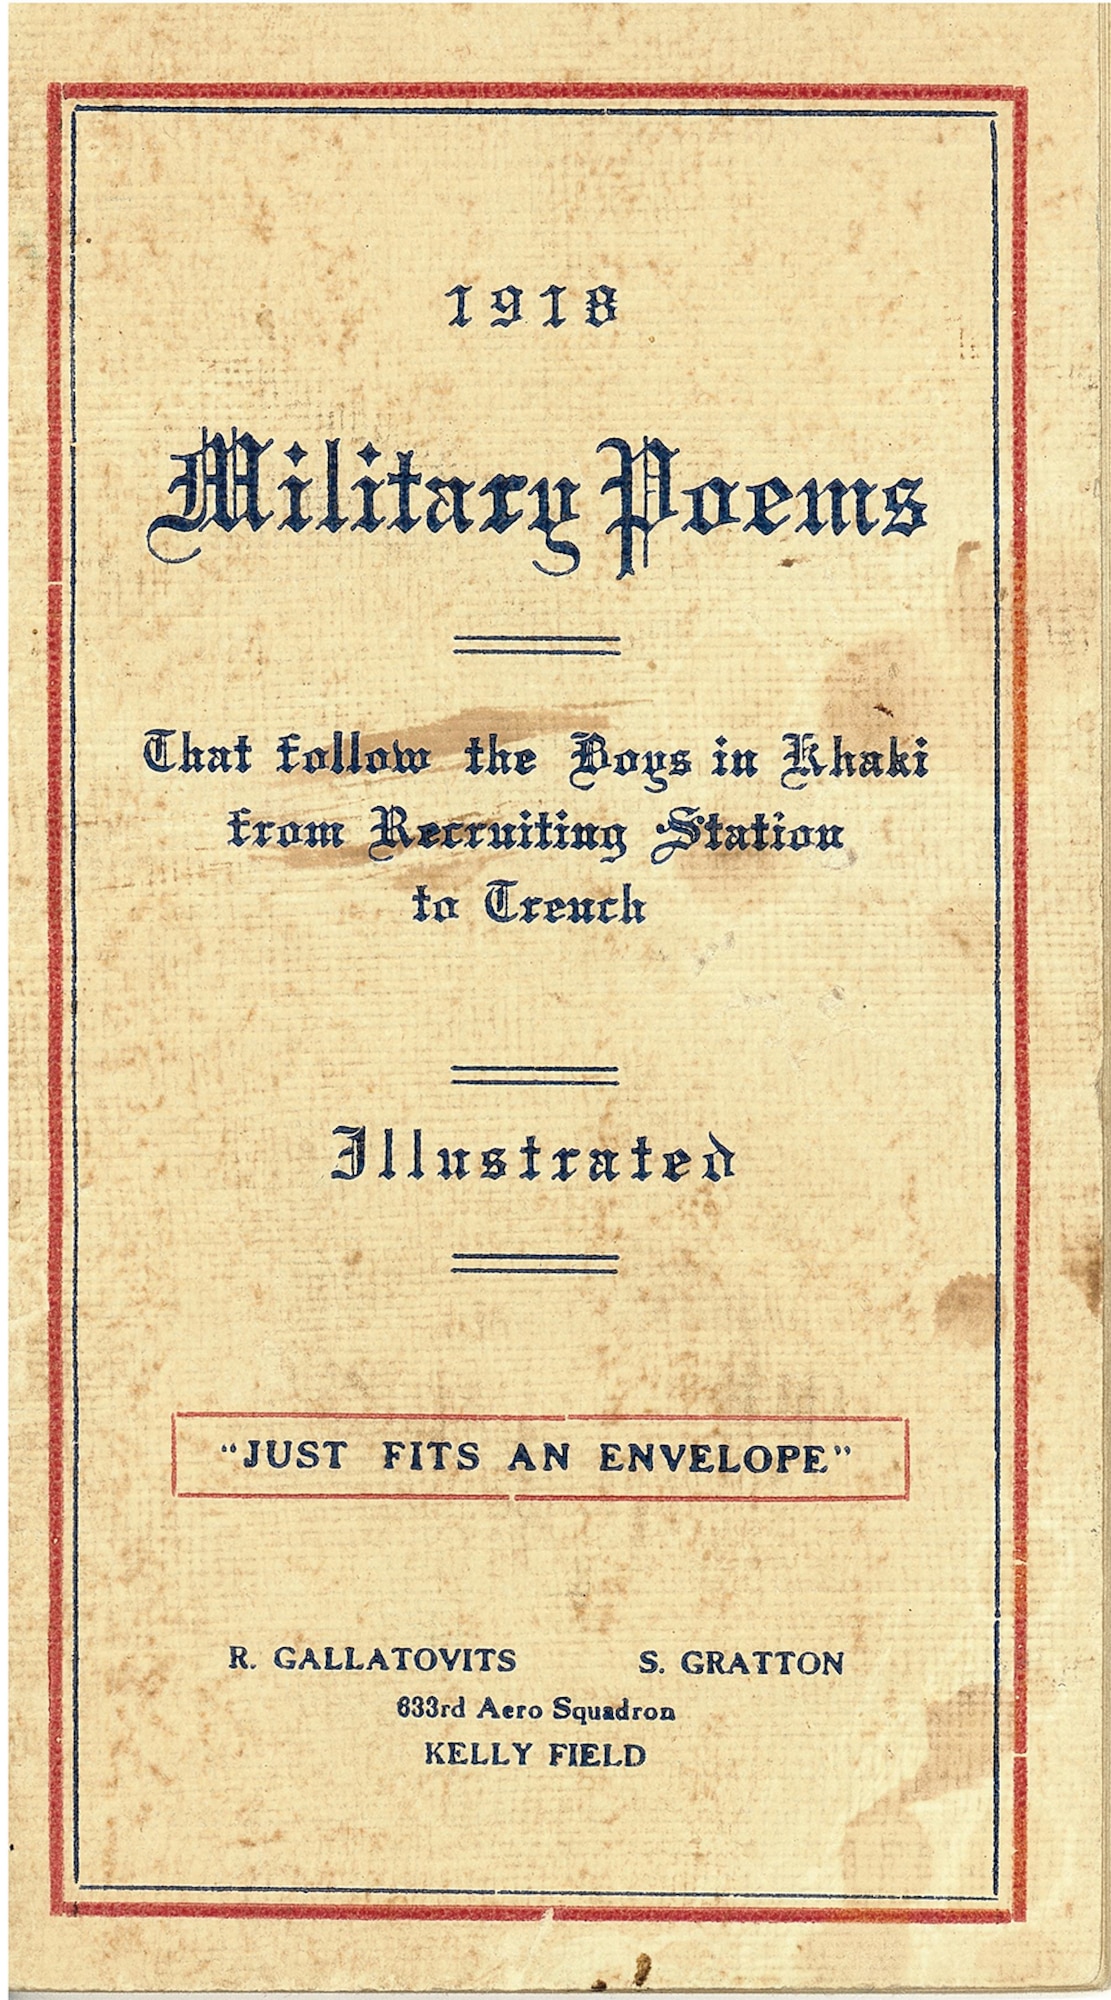 This 47-page pocket-size booklet consists of military-related poems and cartoon drawings created by R. Gallatovits and S. Gratton of the 633rd Aero Squadron at Kelly Field, Texas. It was compiled in 1918 for members of the 633rd Aero Squadron to carry with them from training at Kelly Field into combat in Europe. (U.S. Air Force photo)